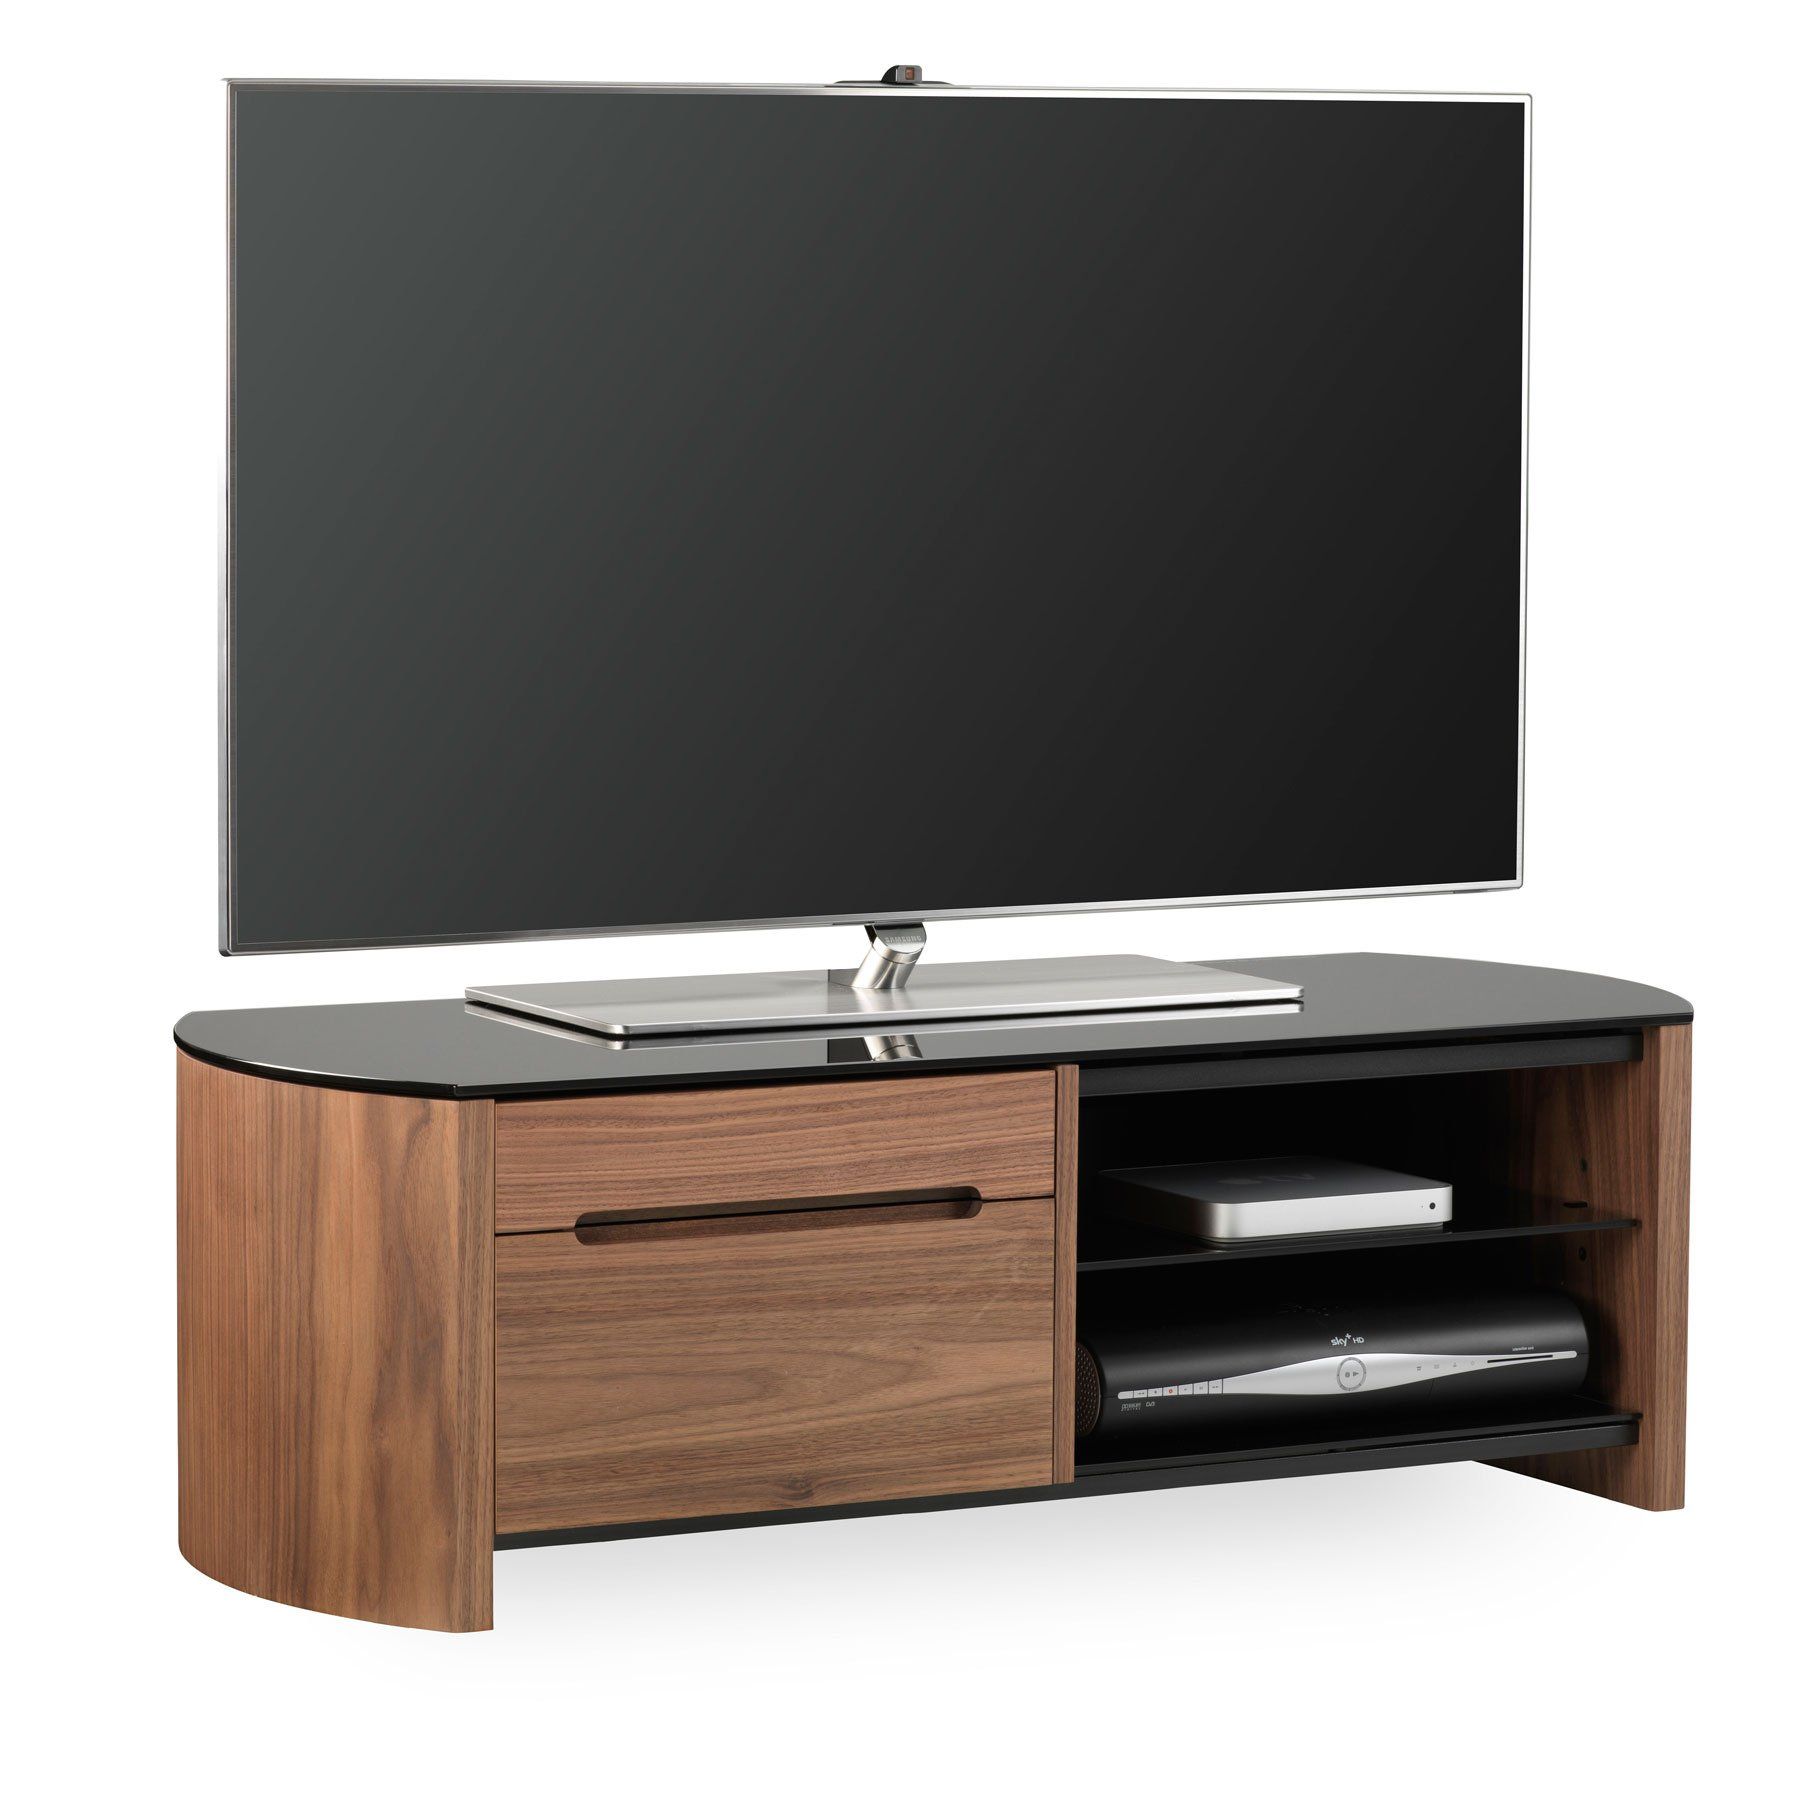 Alphason Finewood Fw1100cb Walnut Tv Stand For Up To 50" Tvs Within Walnut Tv Stand (View 1 of 15)